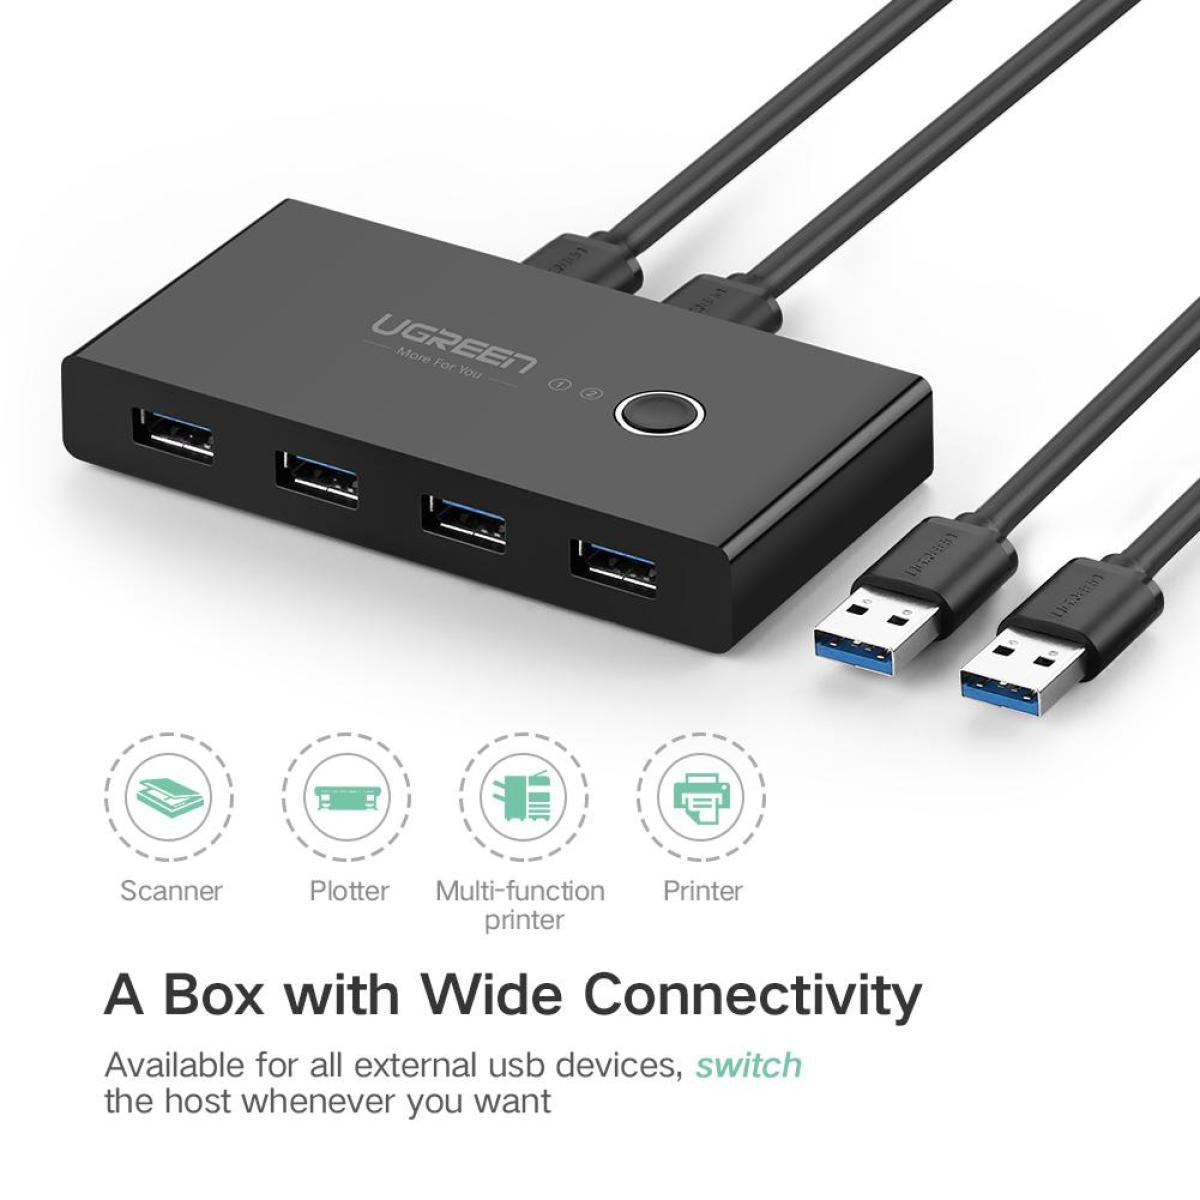 UGREEN US216 2 In 4 Out USB 3.0 Sharing Switch Box